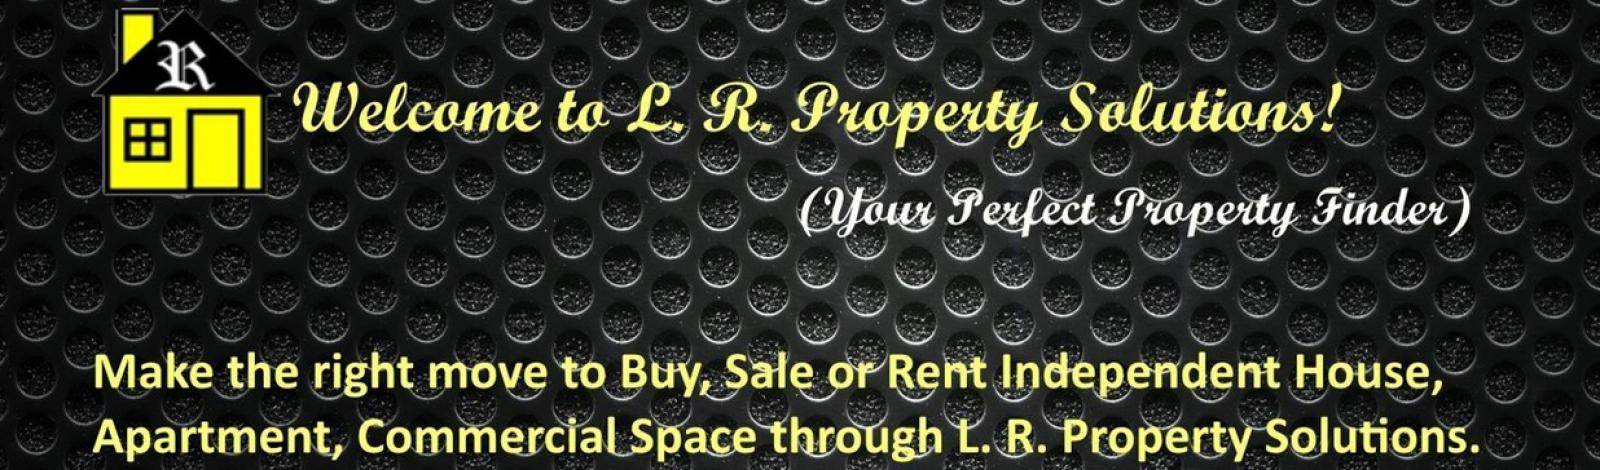 L. R, Property Solutions banner